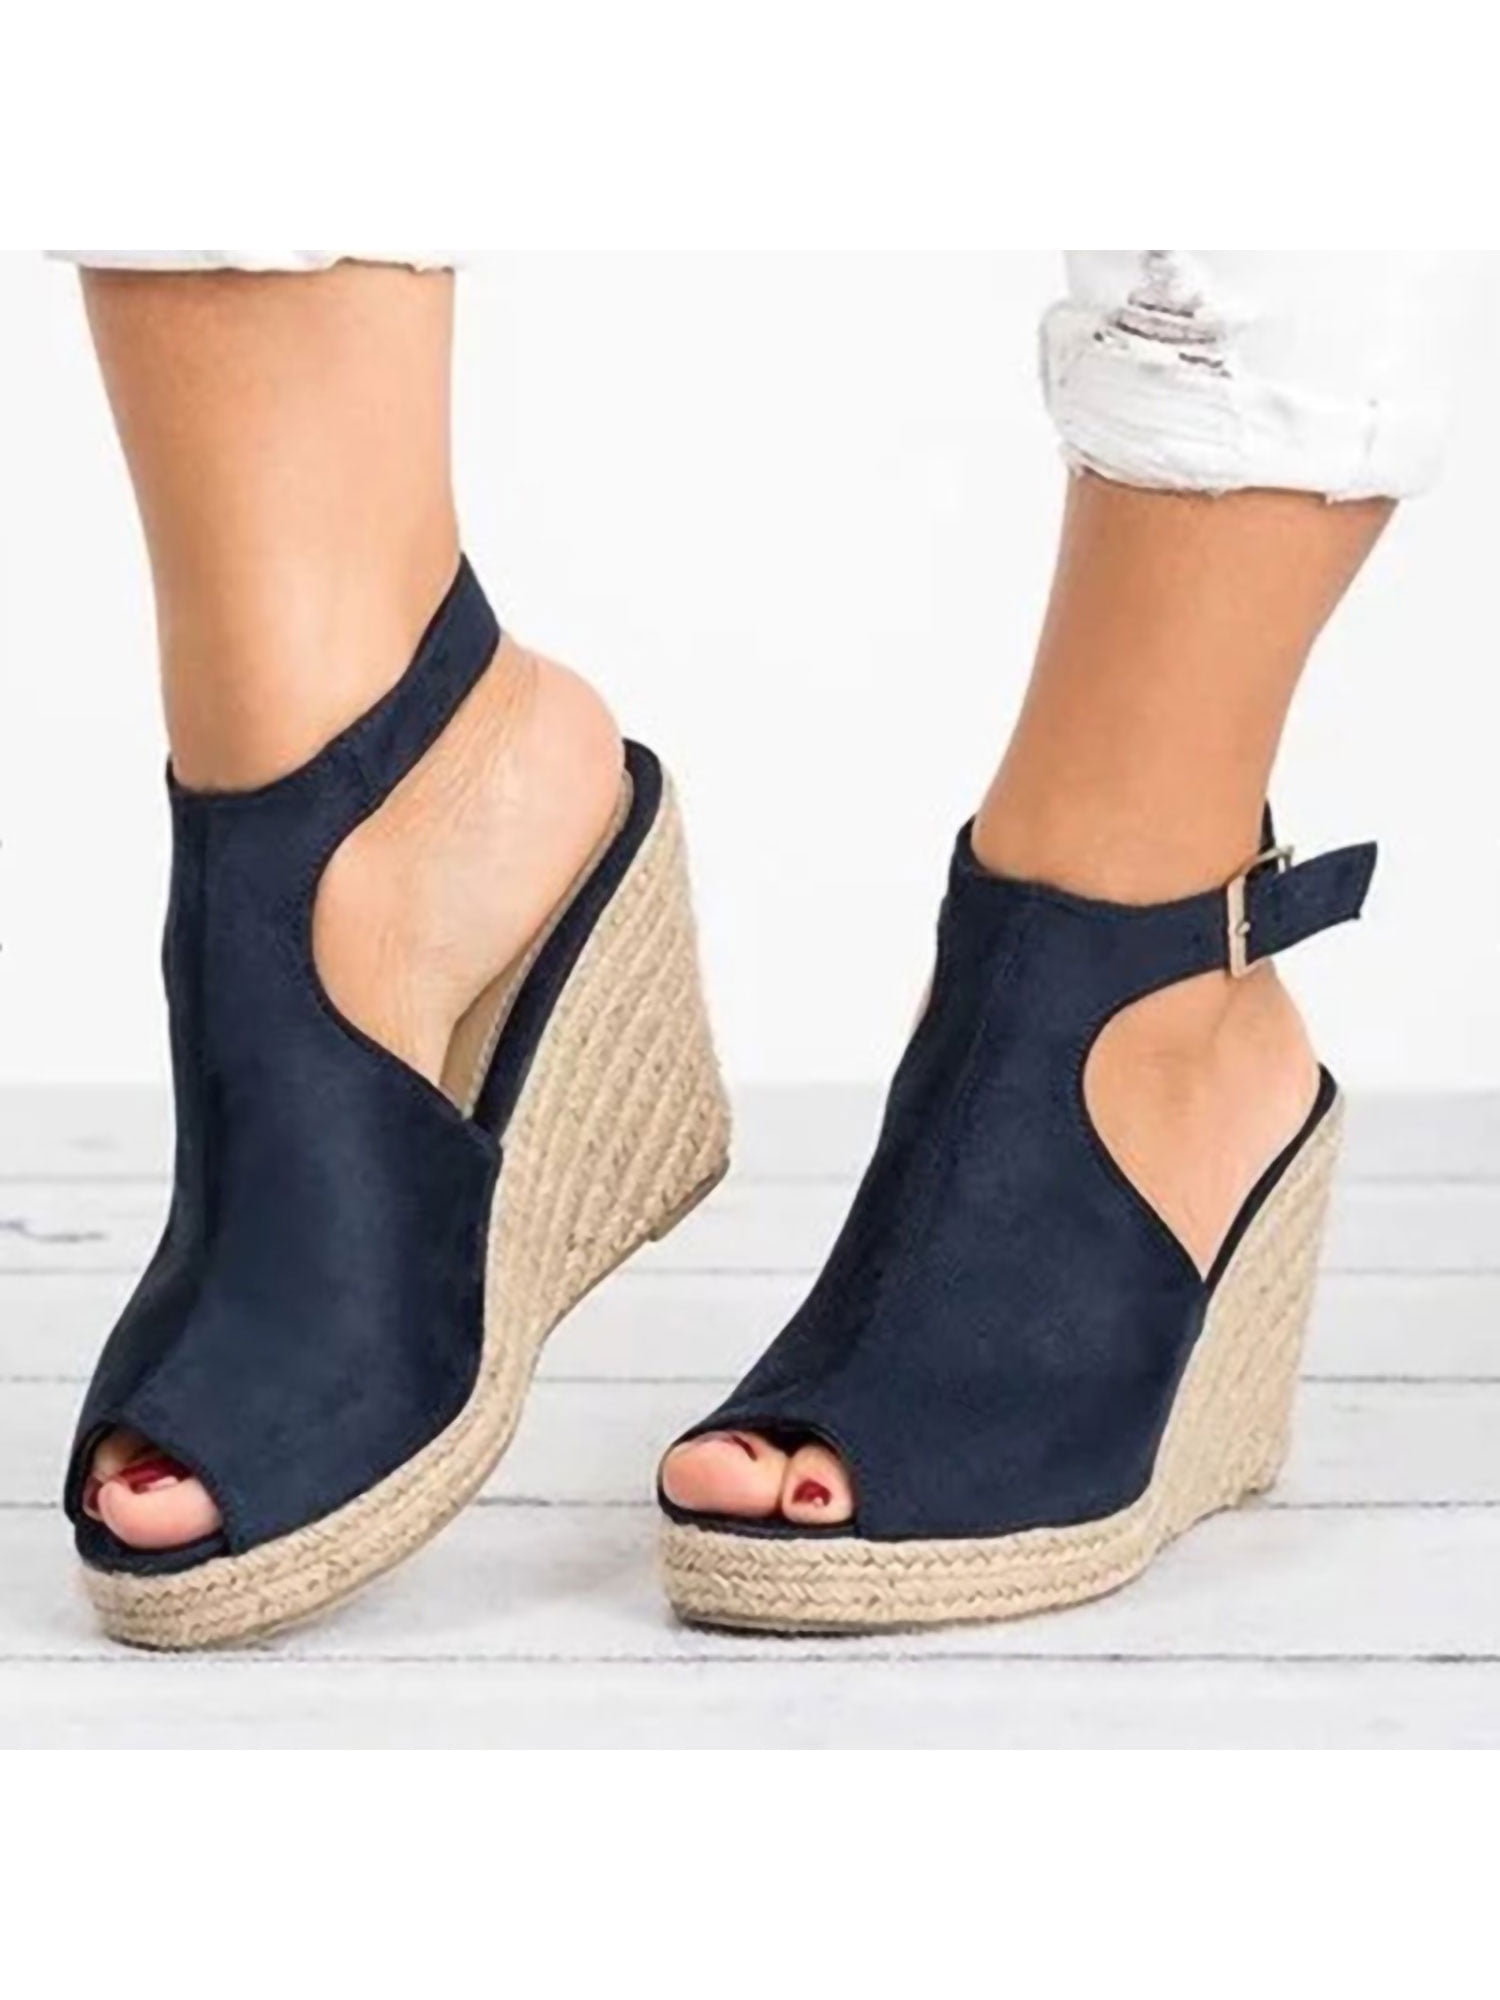 summer Womens Ankle Buckle Strap High Heel Open Toe Faux Suede Sandals Shoes hot 